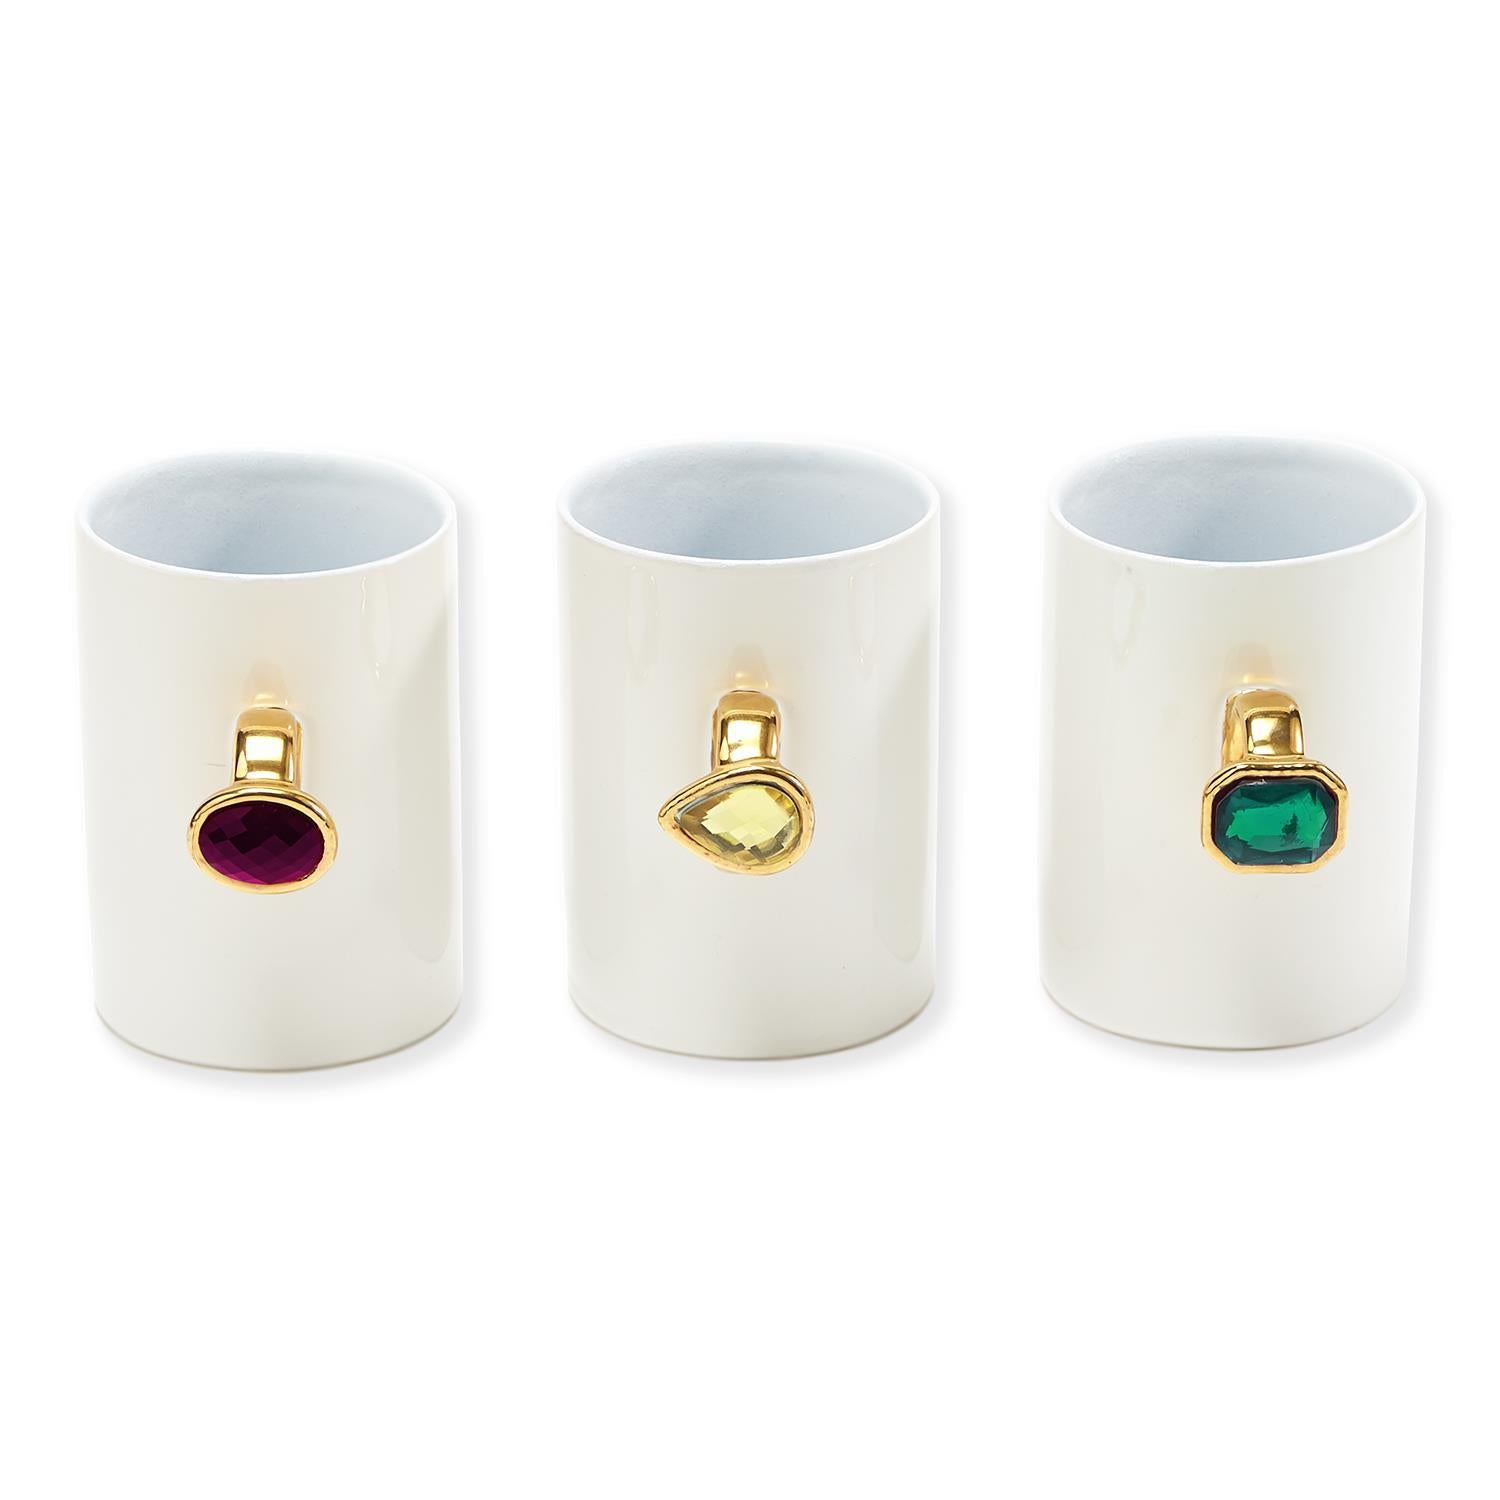 Three plain white mugs with gem rings for handles; the left mug has a pink oval gem ring, the middle mug has a yellow teardrop gem ring, and the right mug has a green emerald-cut gem ring.